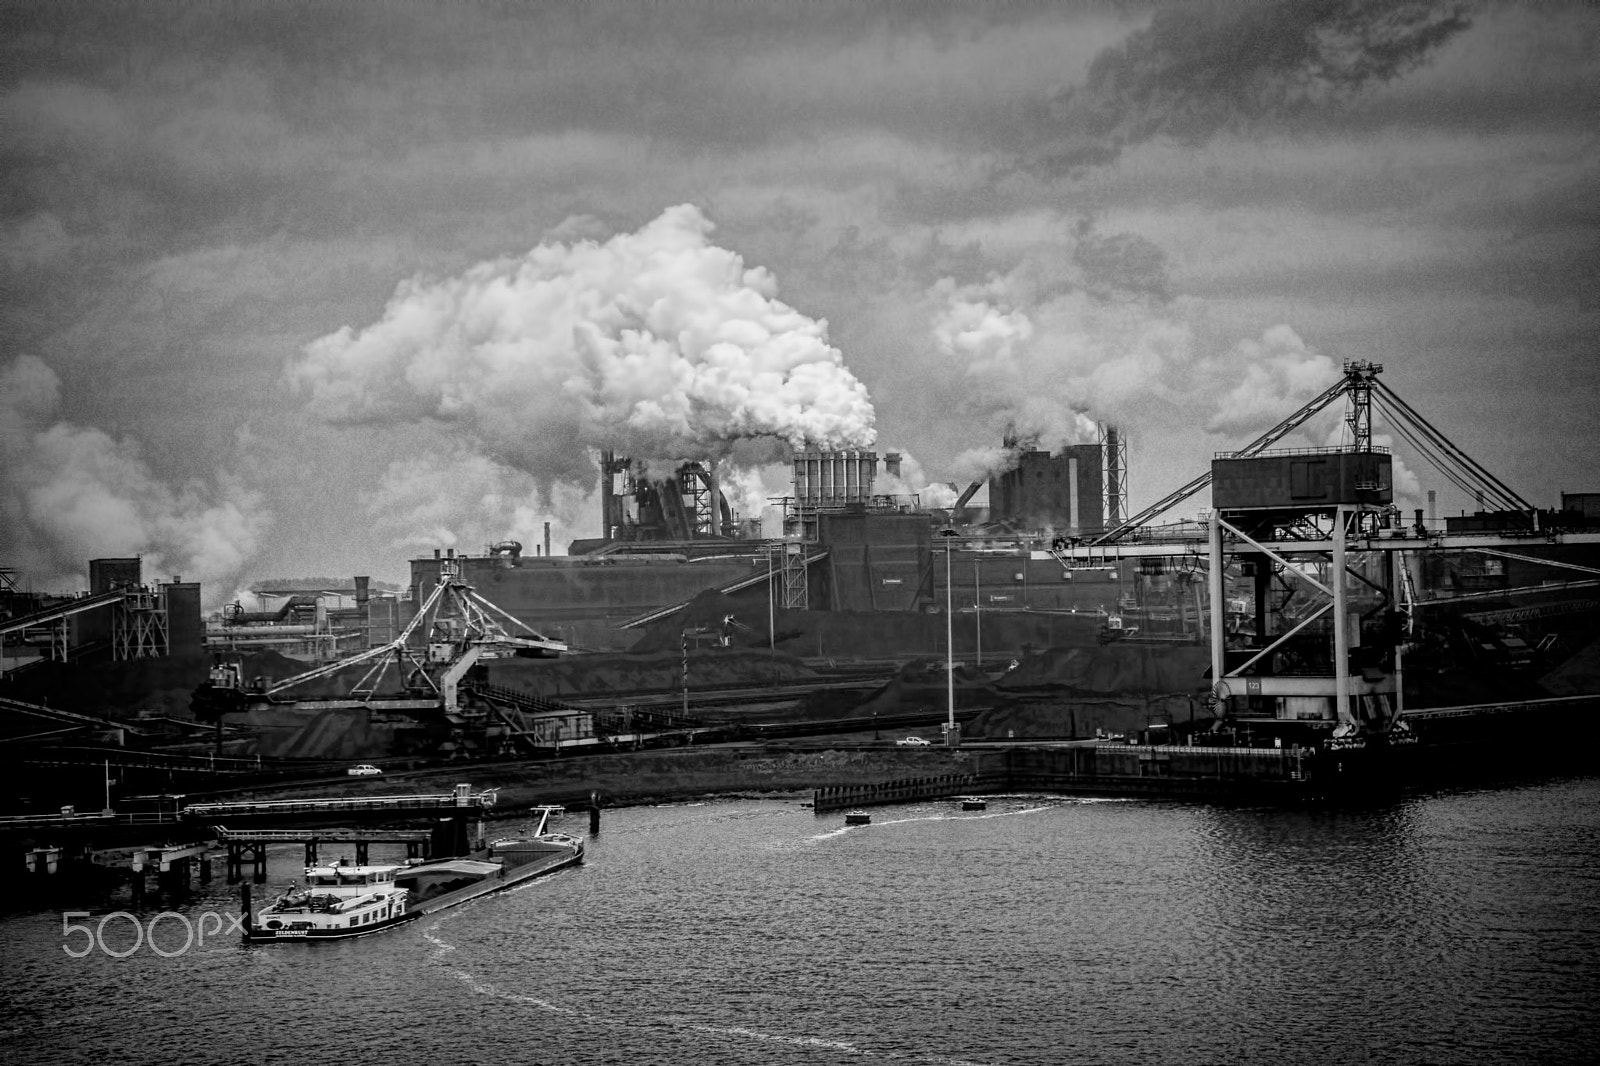 Sony SLT-A77 + Tamron 18-270mm F3.5-6.3 Di II PZD sample photo. Steelworks at ijmuiden photography